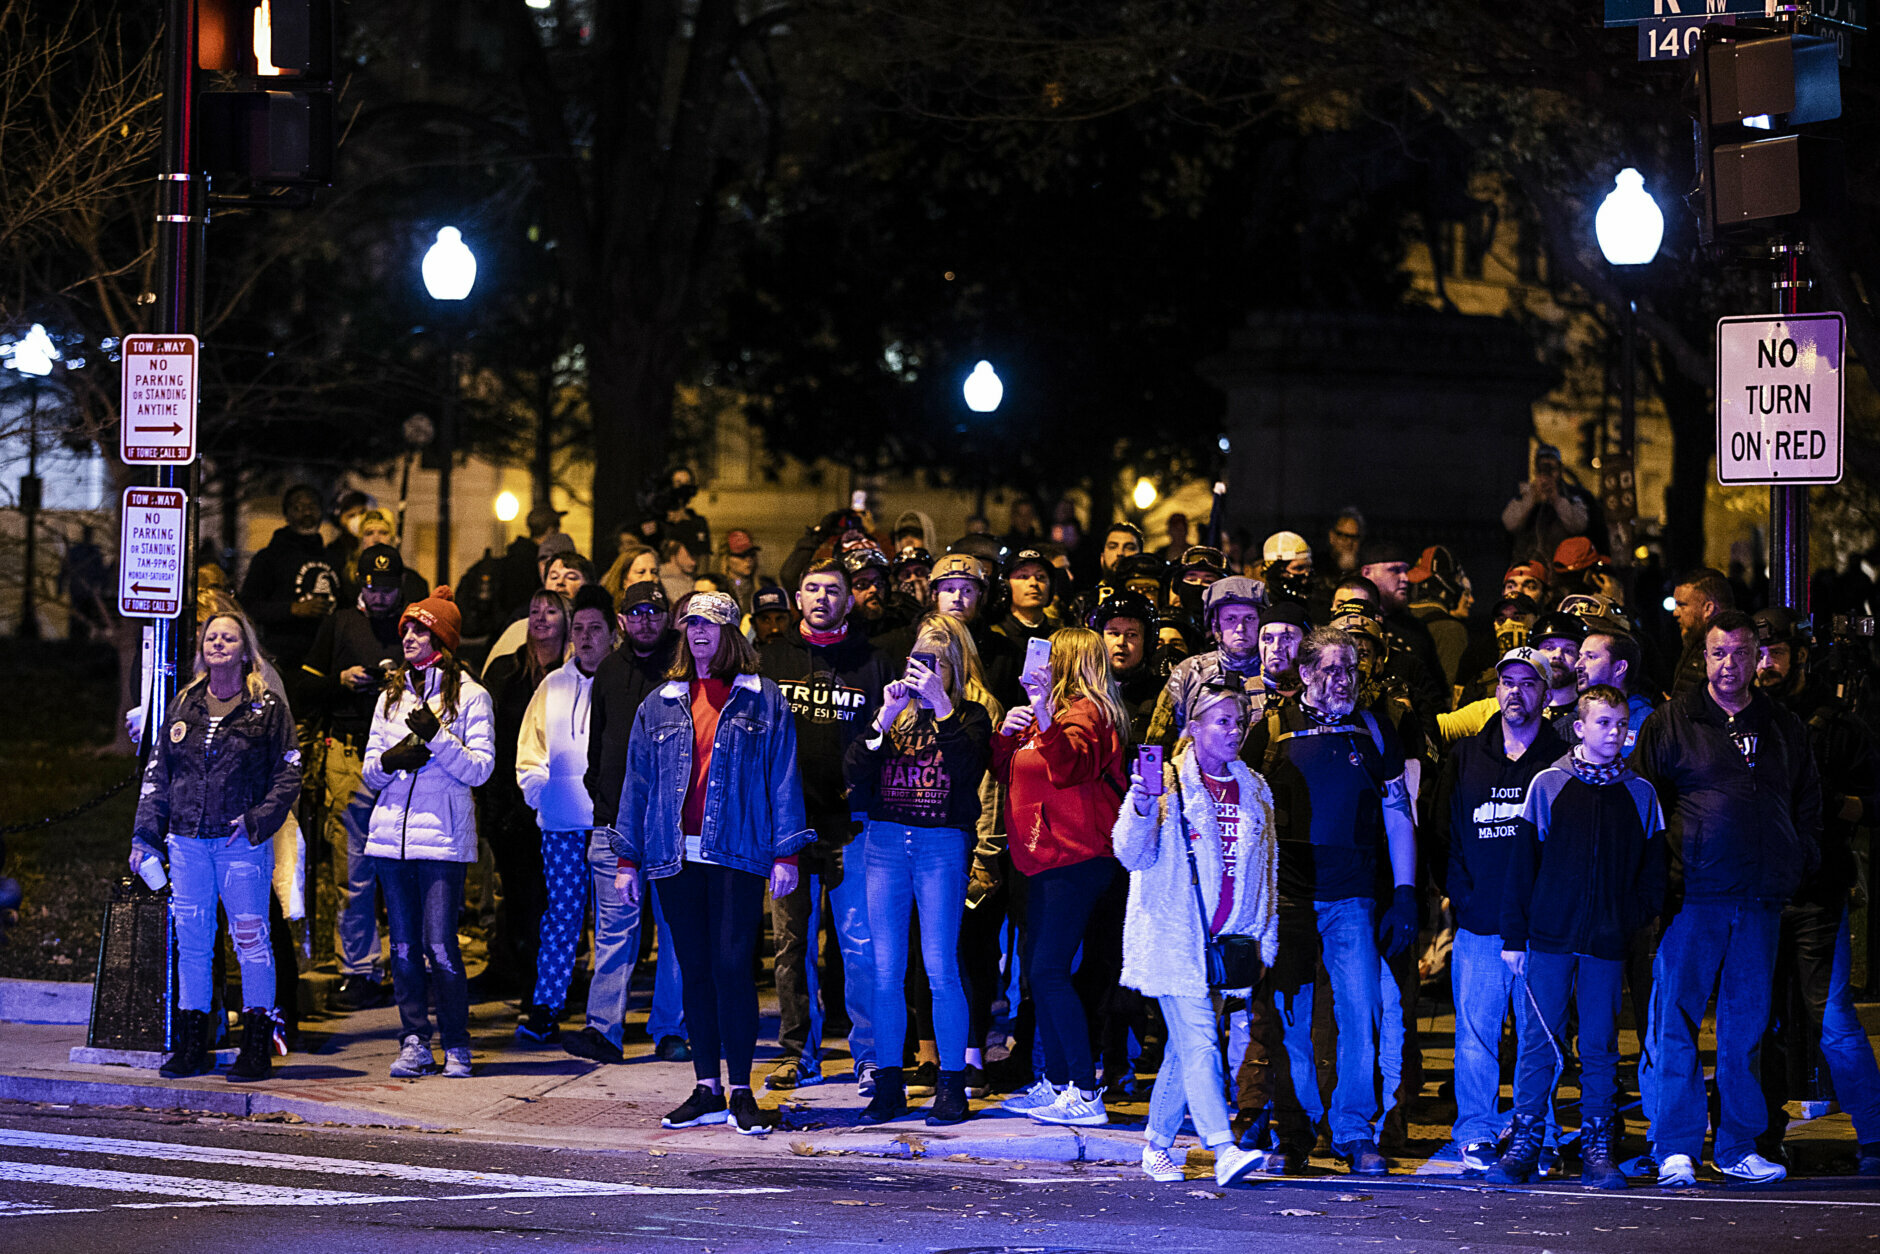 WASHINGTON, DC - DECEMBER 12: Supporters of President Donald Trump gather near Black Lives Matter Plaza during a protest on December 12, 2020 in Washington, DC. Thousands of protesters who refuse to accept that President-elect Joe Biden won the election are rallying ahead of the electoral college vote to make Trump's 306-to-232 loss official. (Photo by Tasos Katopodis/Getty Images)